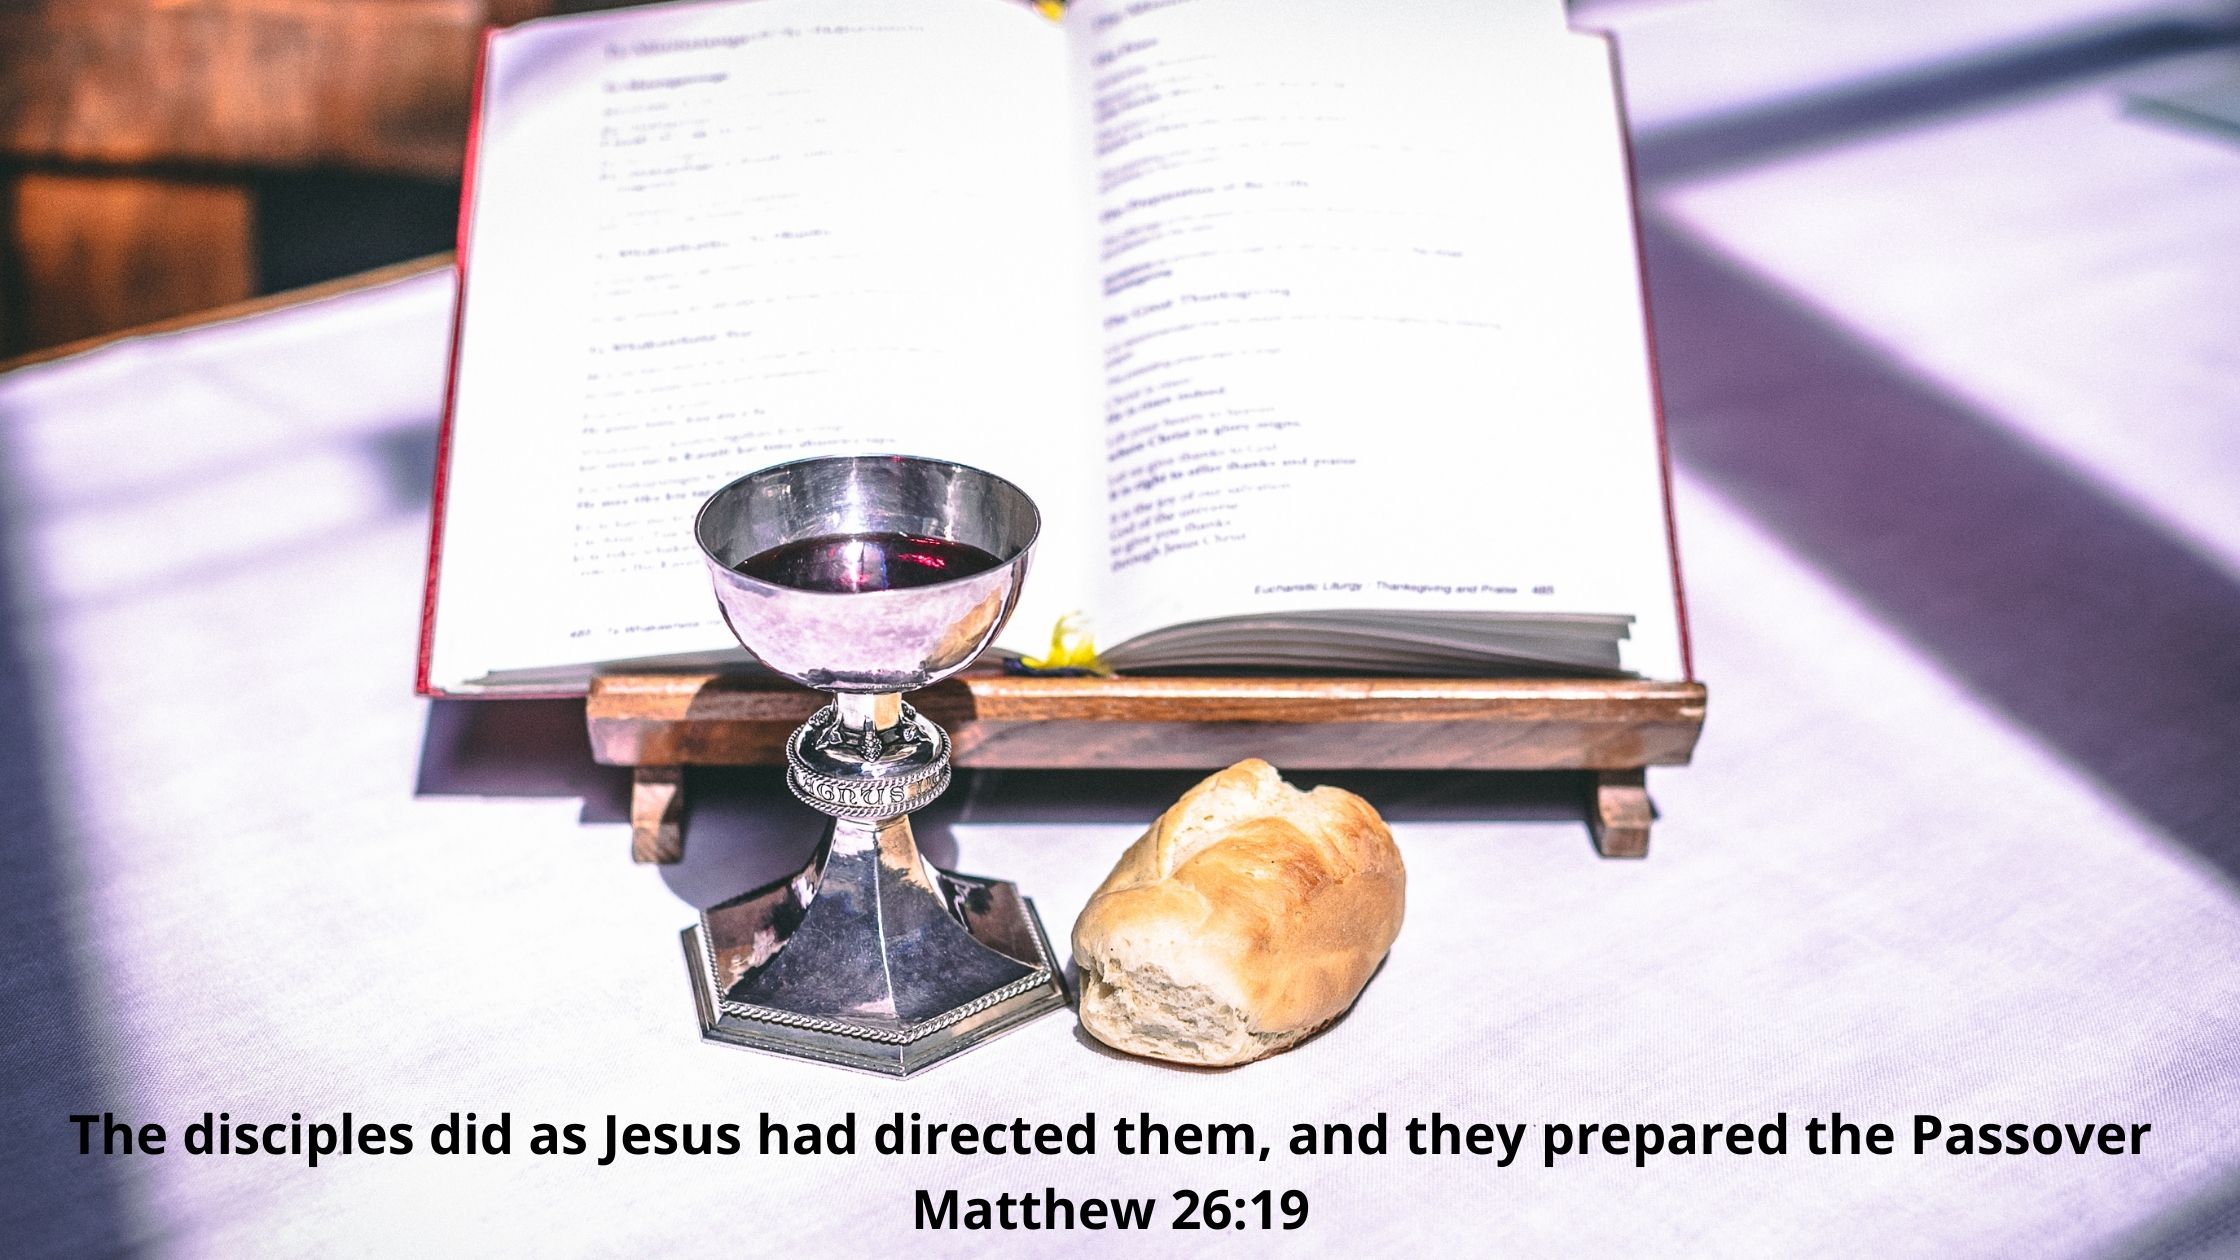 The disciples did as Jesus had directed them and they prepared the Passover